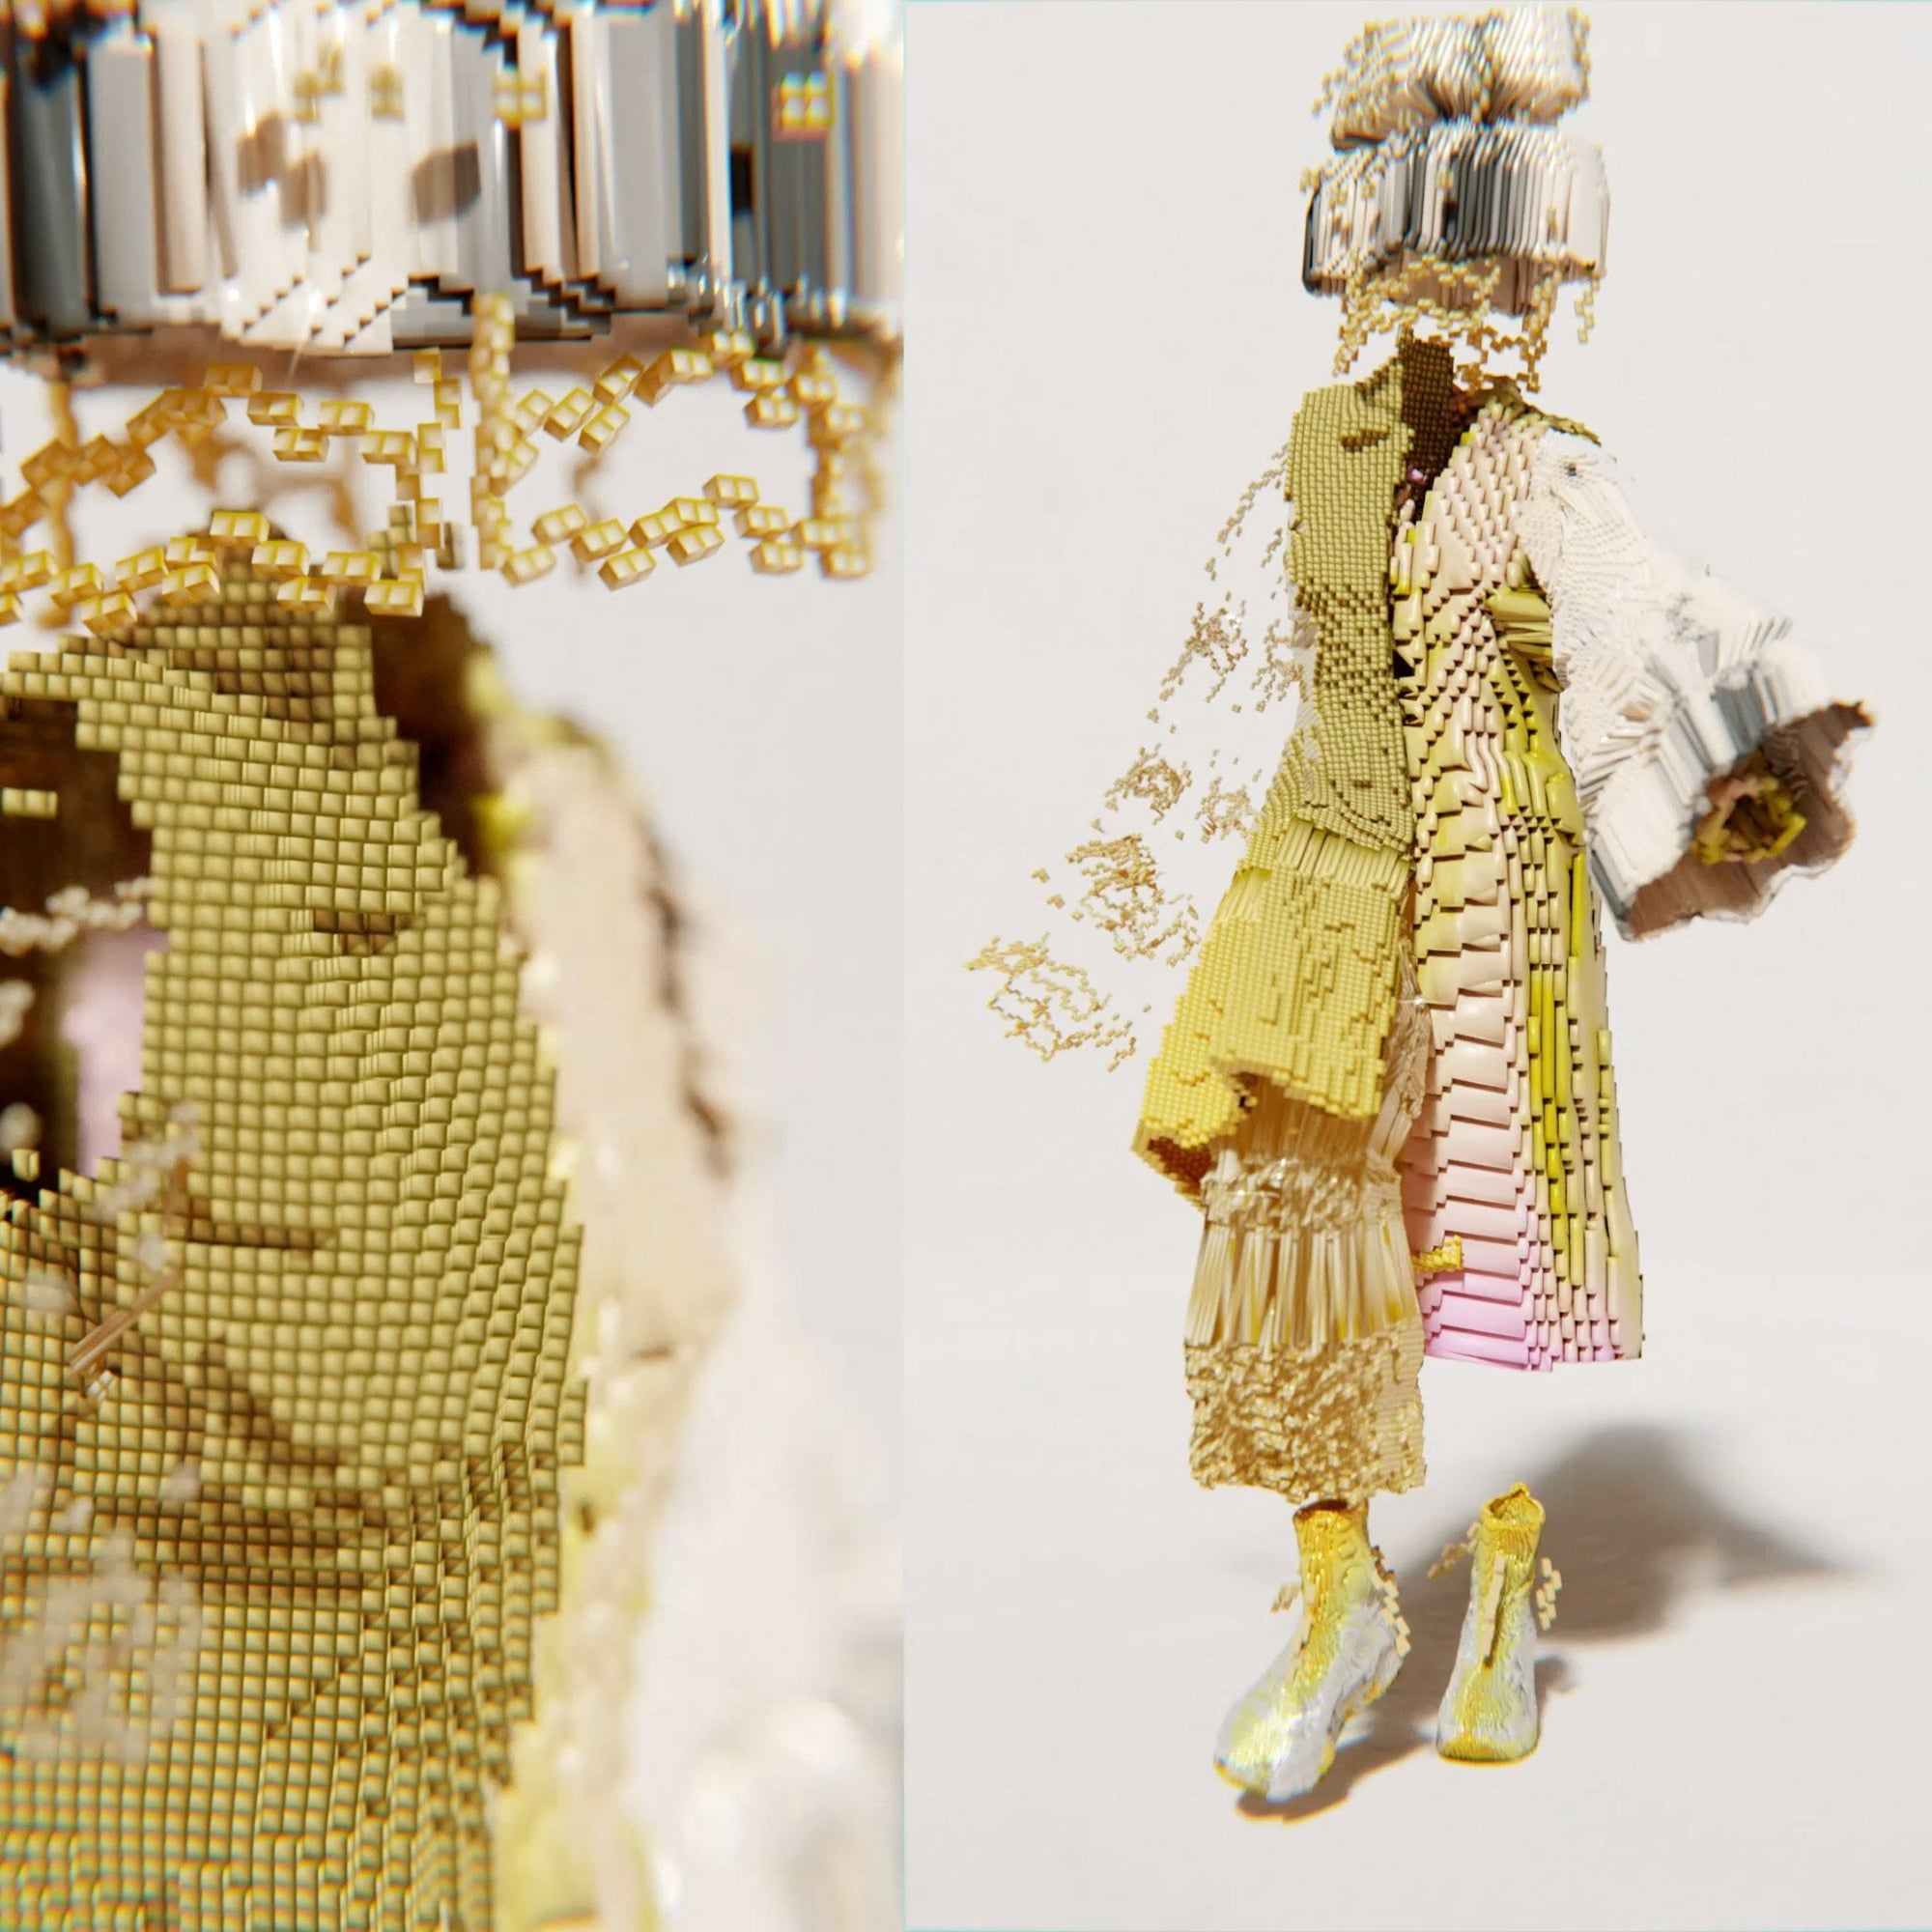 Pixelated gold outfit featured in Latvian artist Santa Kupča's 